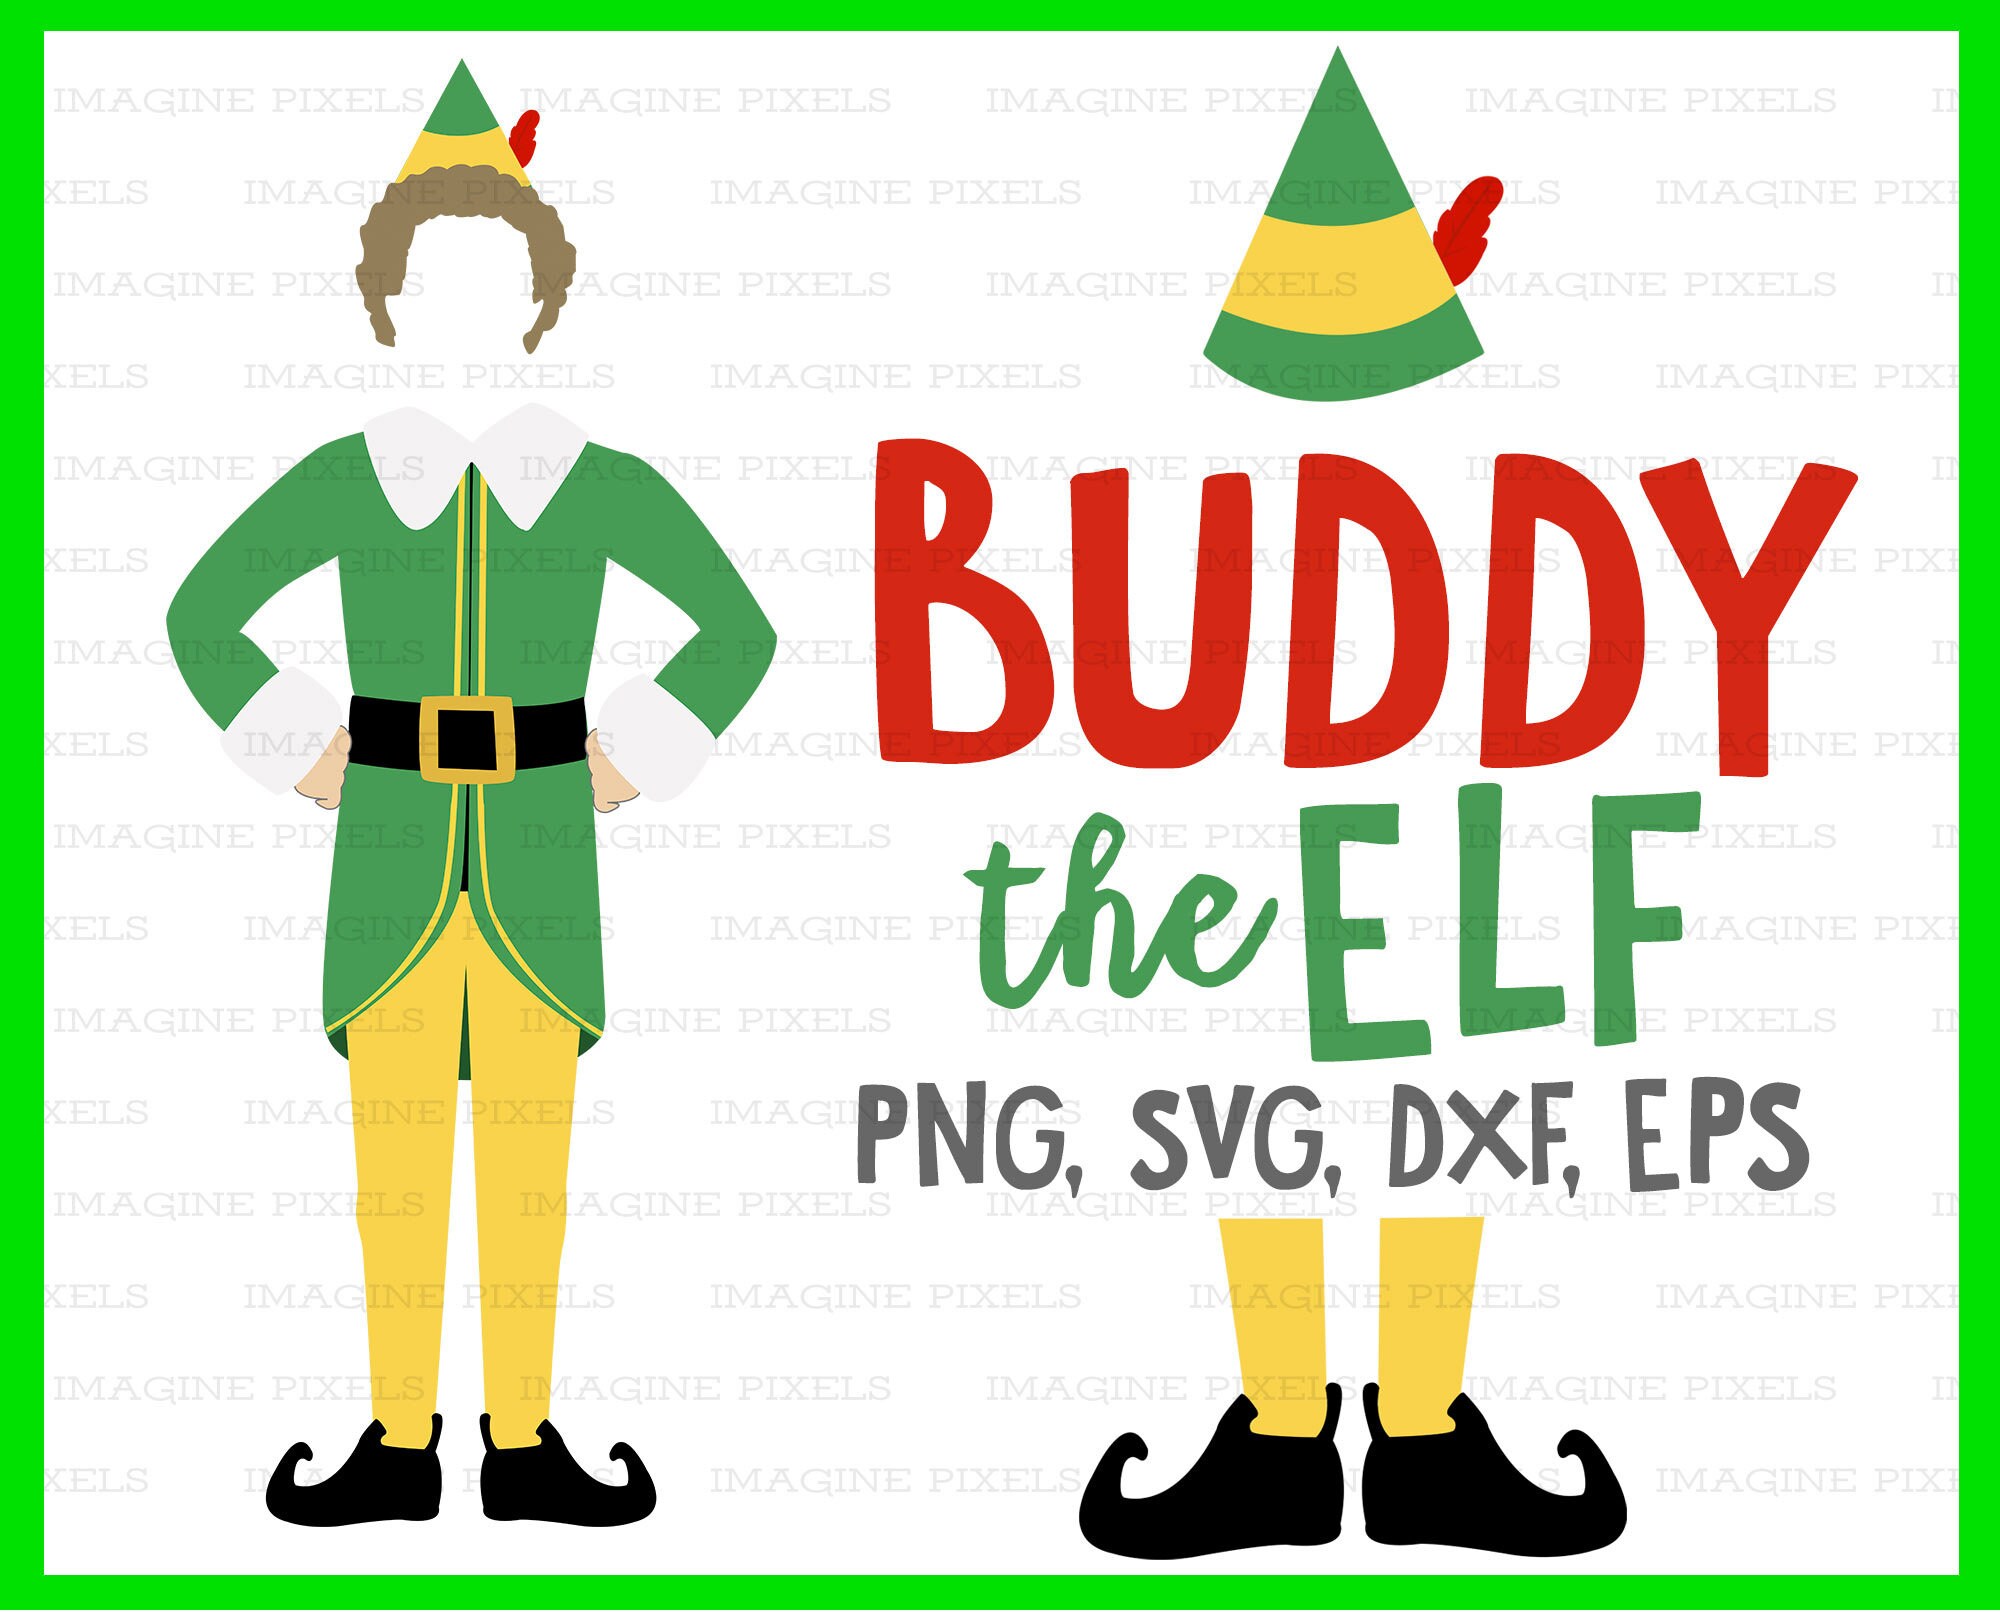 Download Buddy The Elf Christmas SVG PNG DXF eps Holiday Movie ...